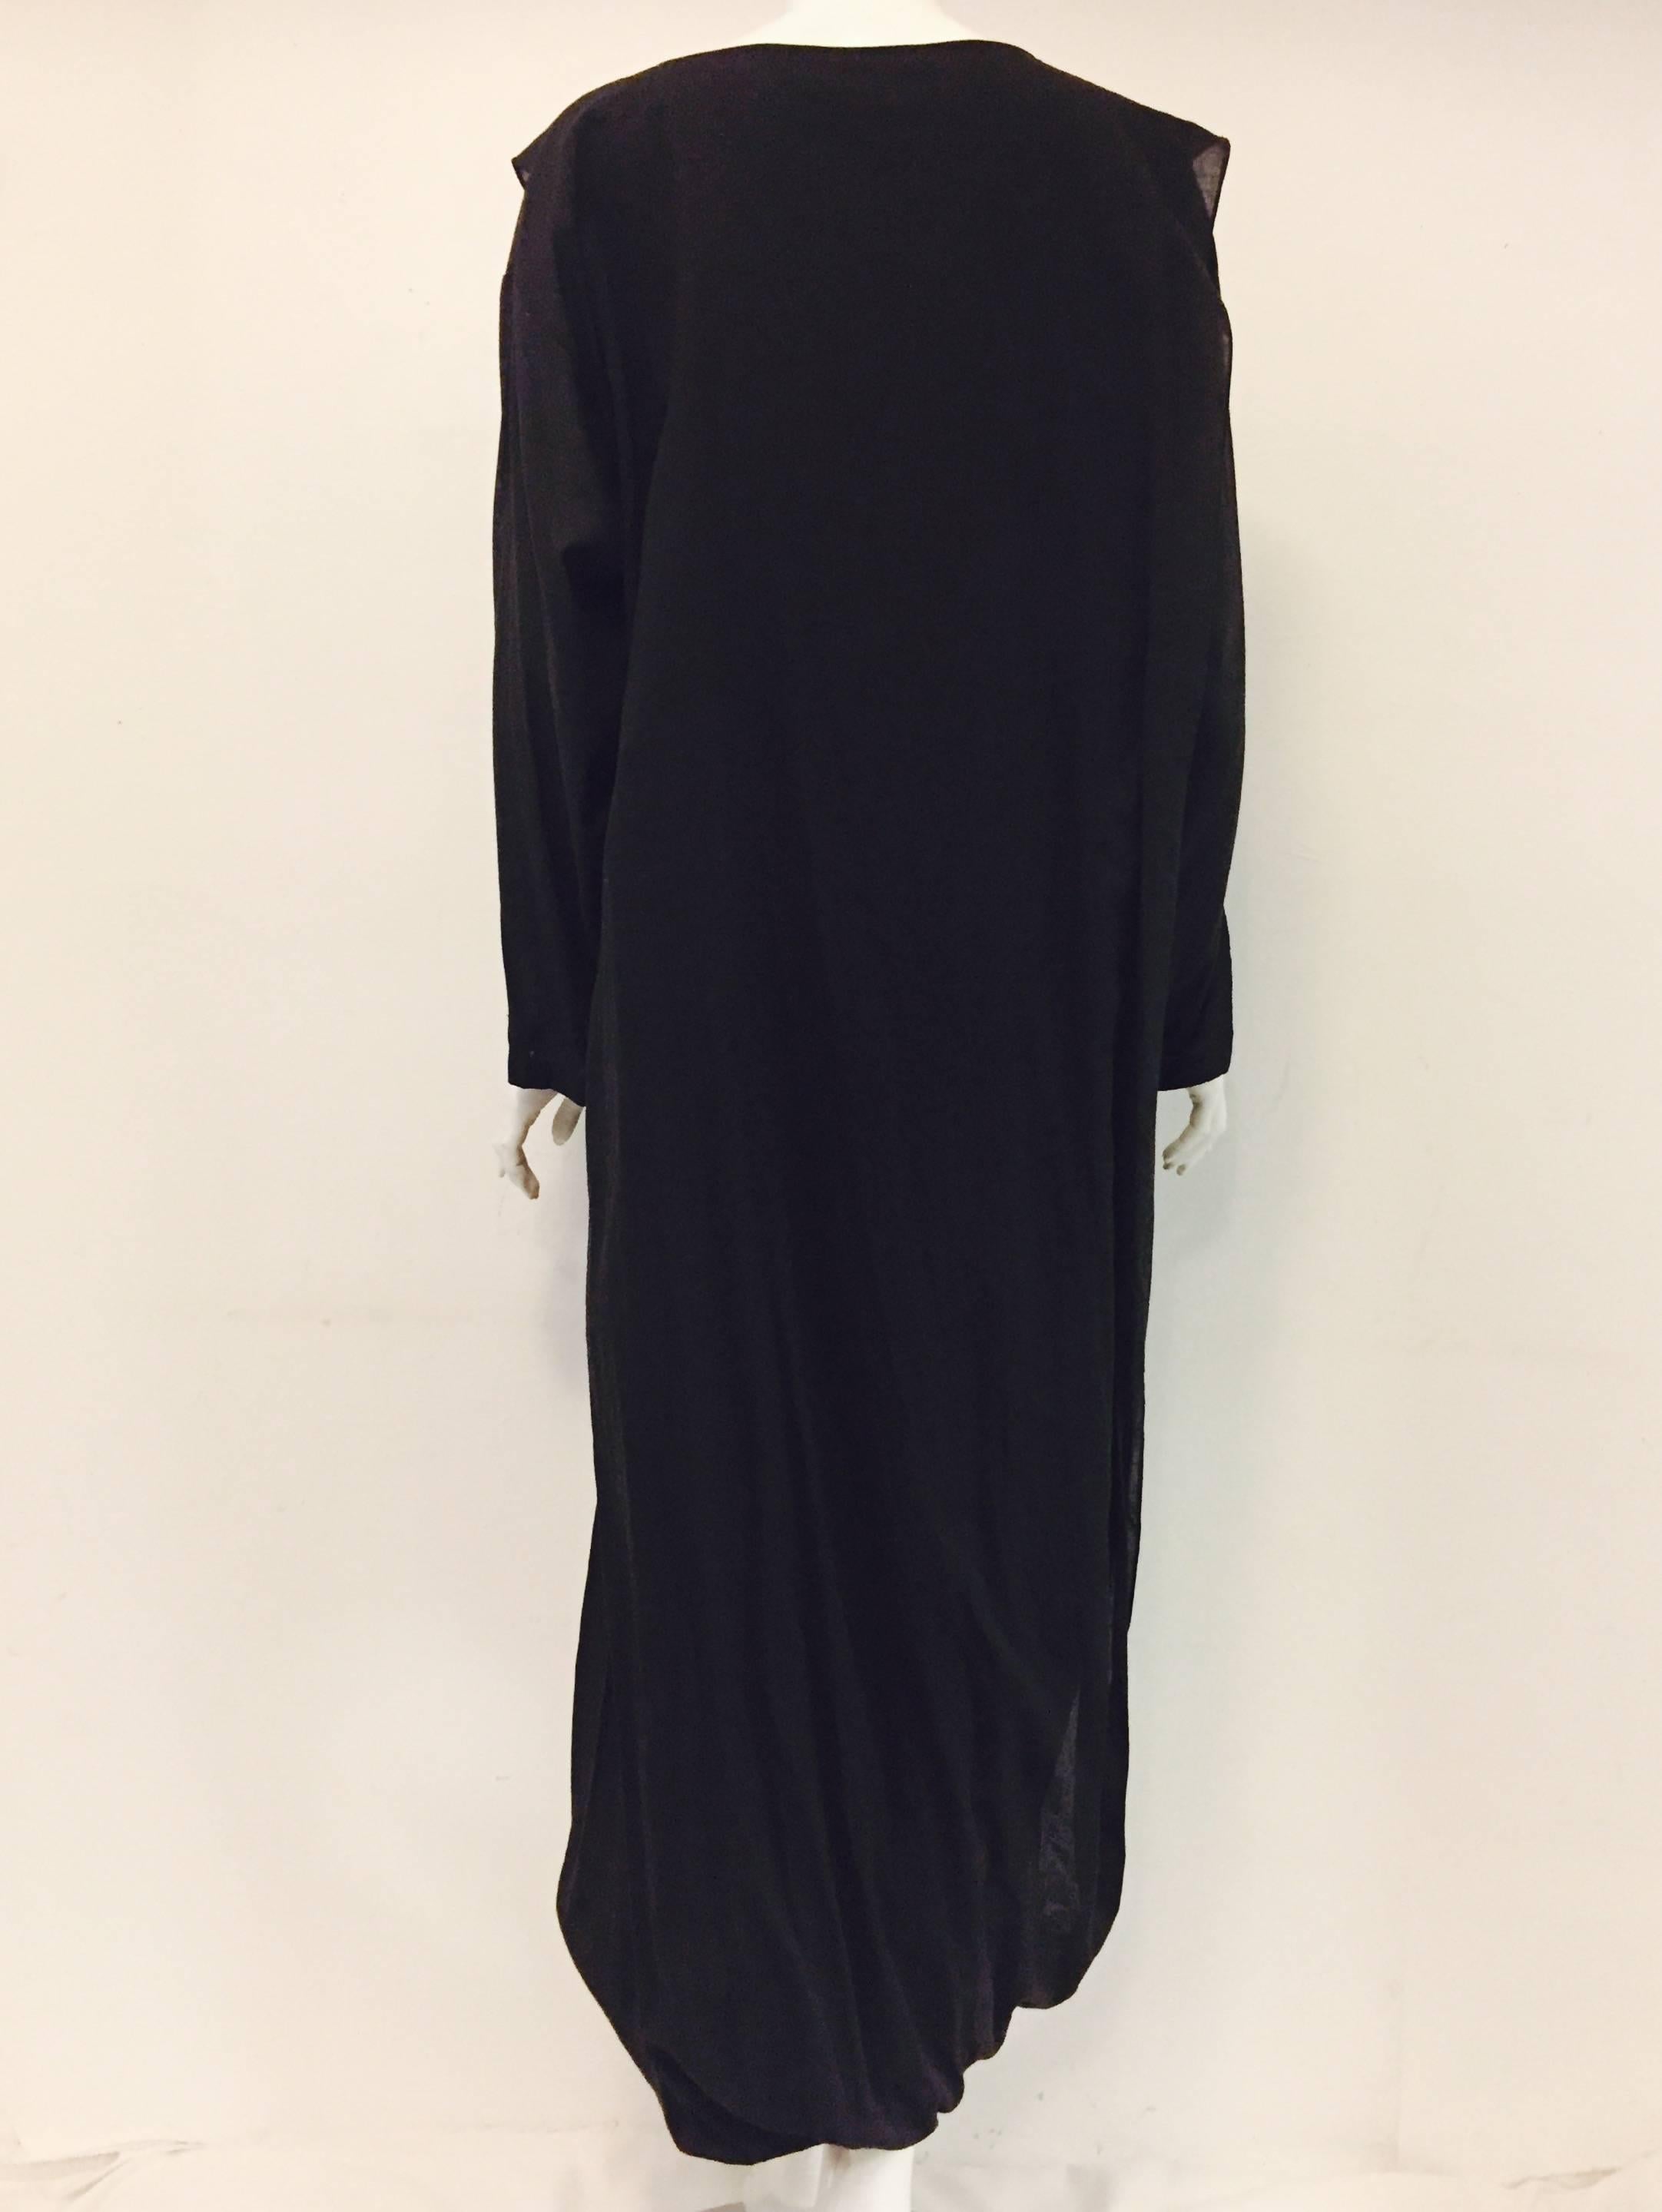 Ingenious Issey Miyake's Long Black Cocoon Dress with Long Sleeves In Excellent Condition For Sale In Palm Beach, FL